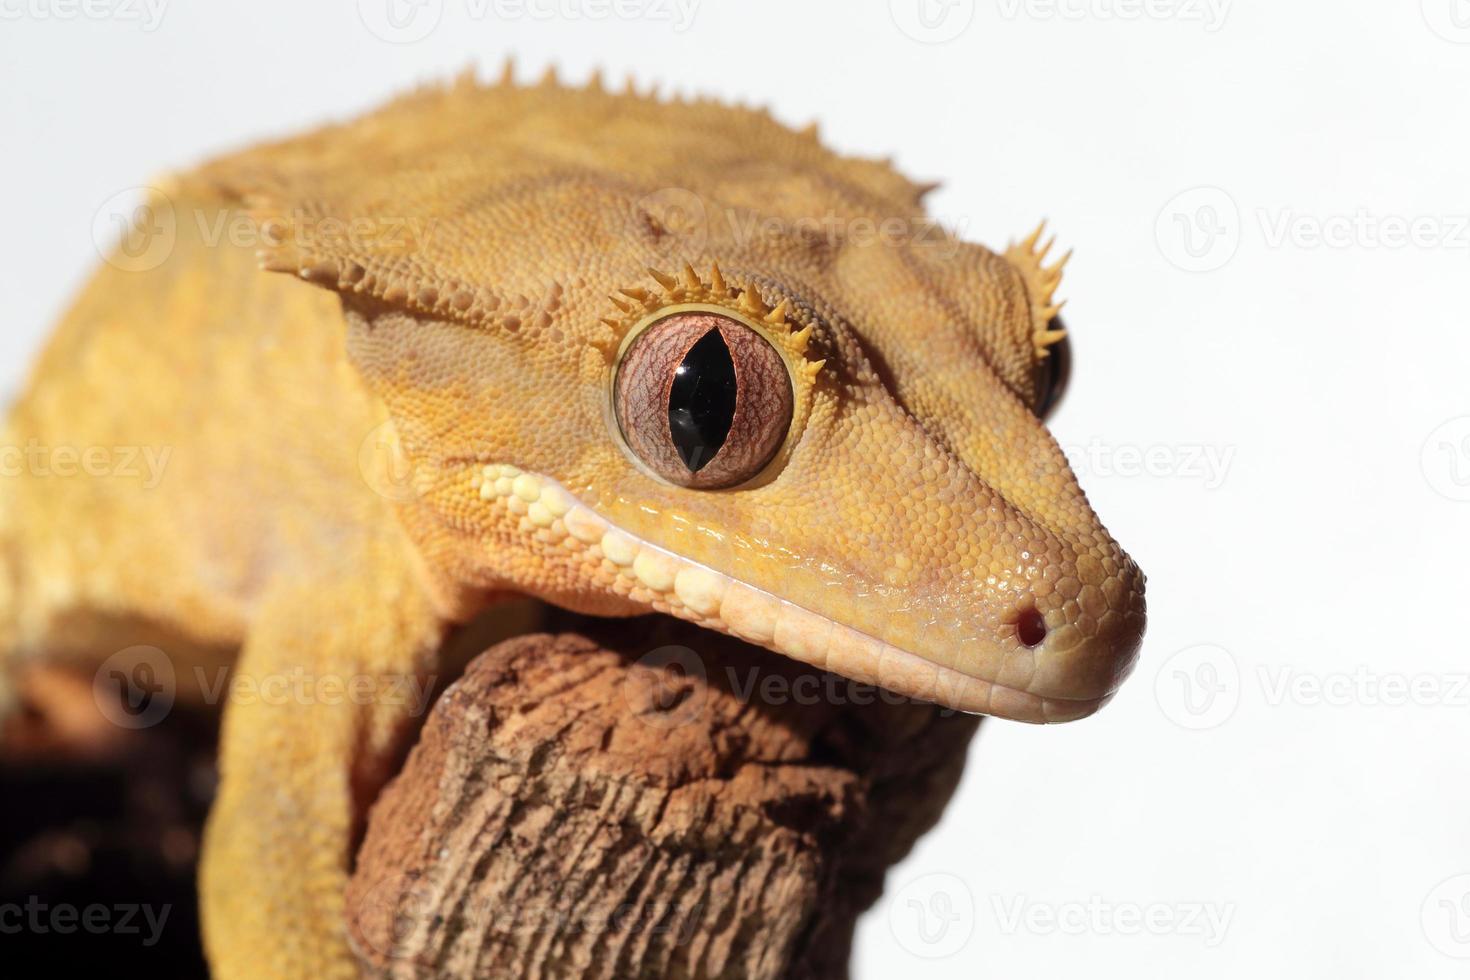 Caledonian crested gecko op witte achtergrond foto